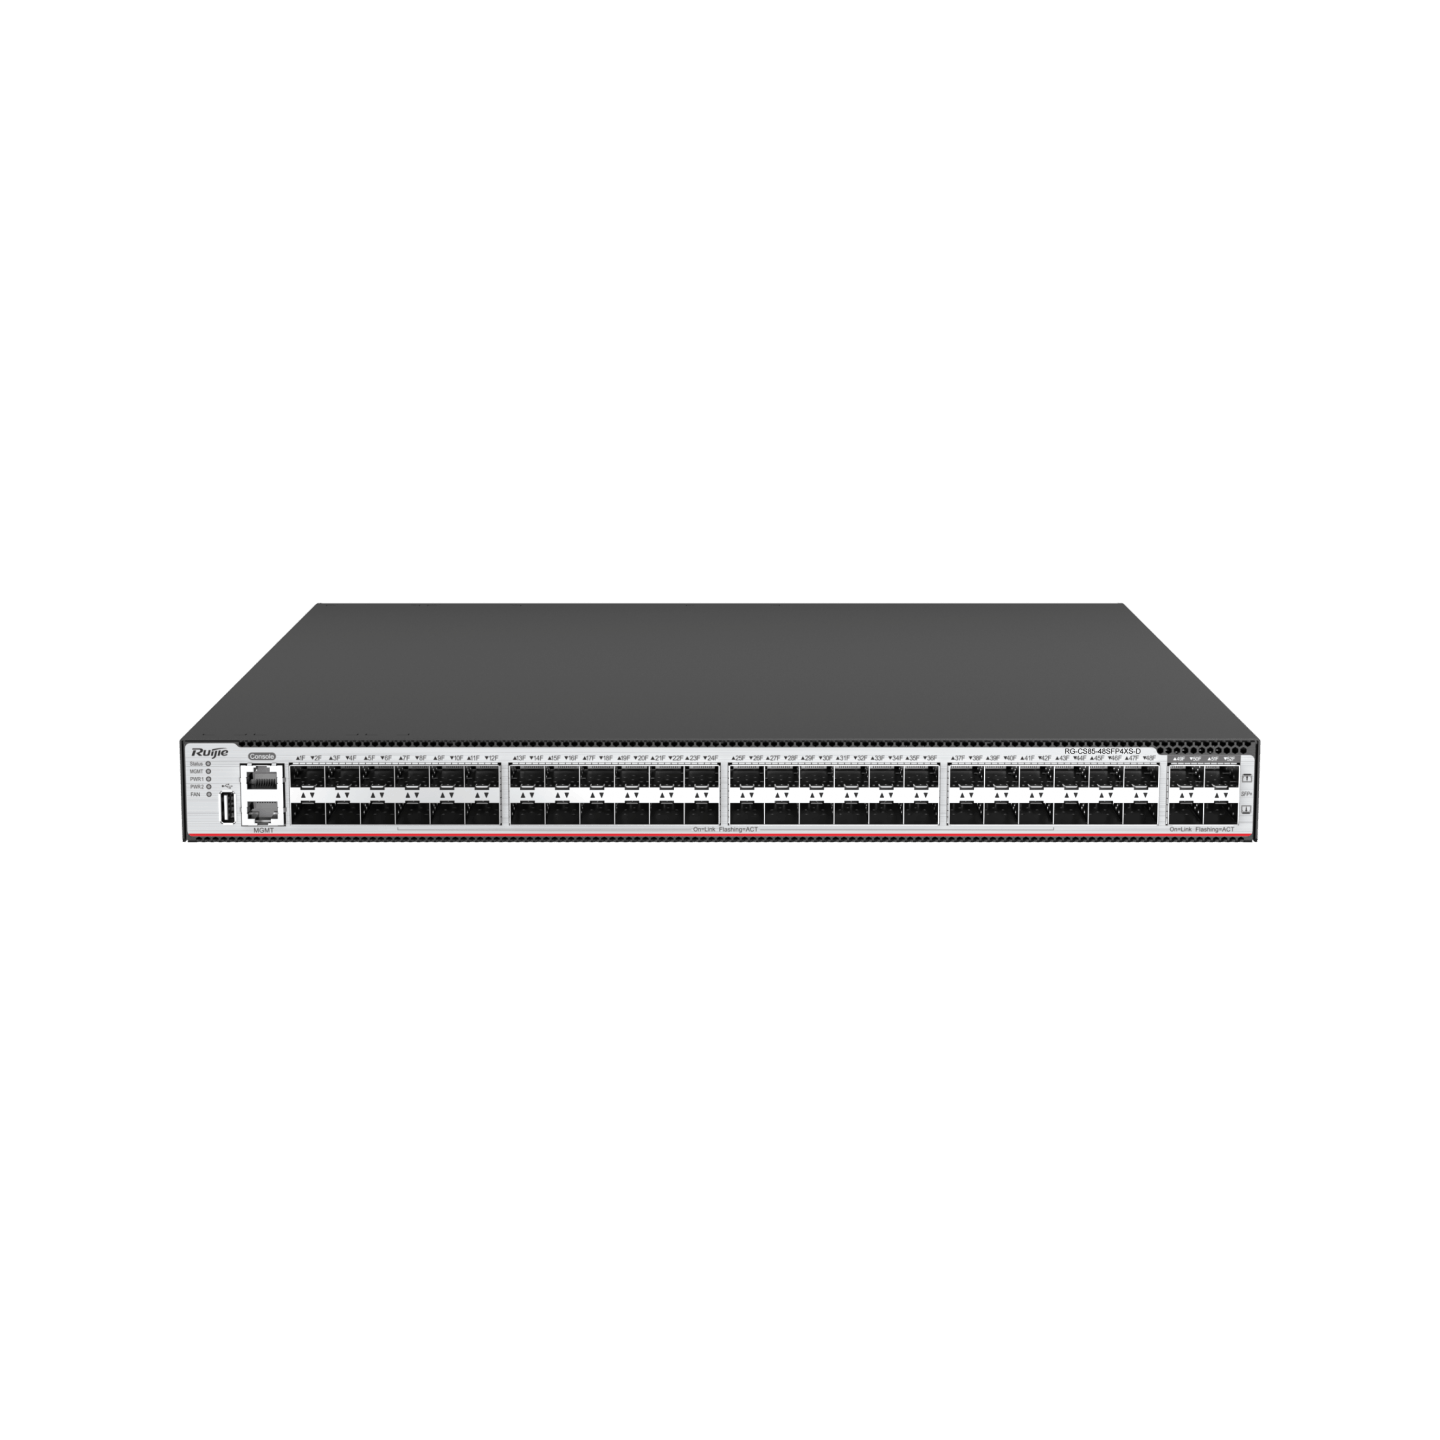 RG-CS85-48SFP4XS-D 48-Port GE All-Optical Layer 3 Enterprise-Class Core or Aggregation Switch, 4 × 10G Uplink Ports